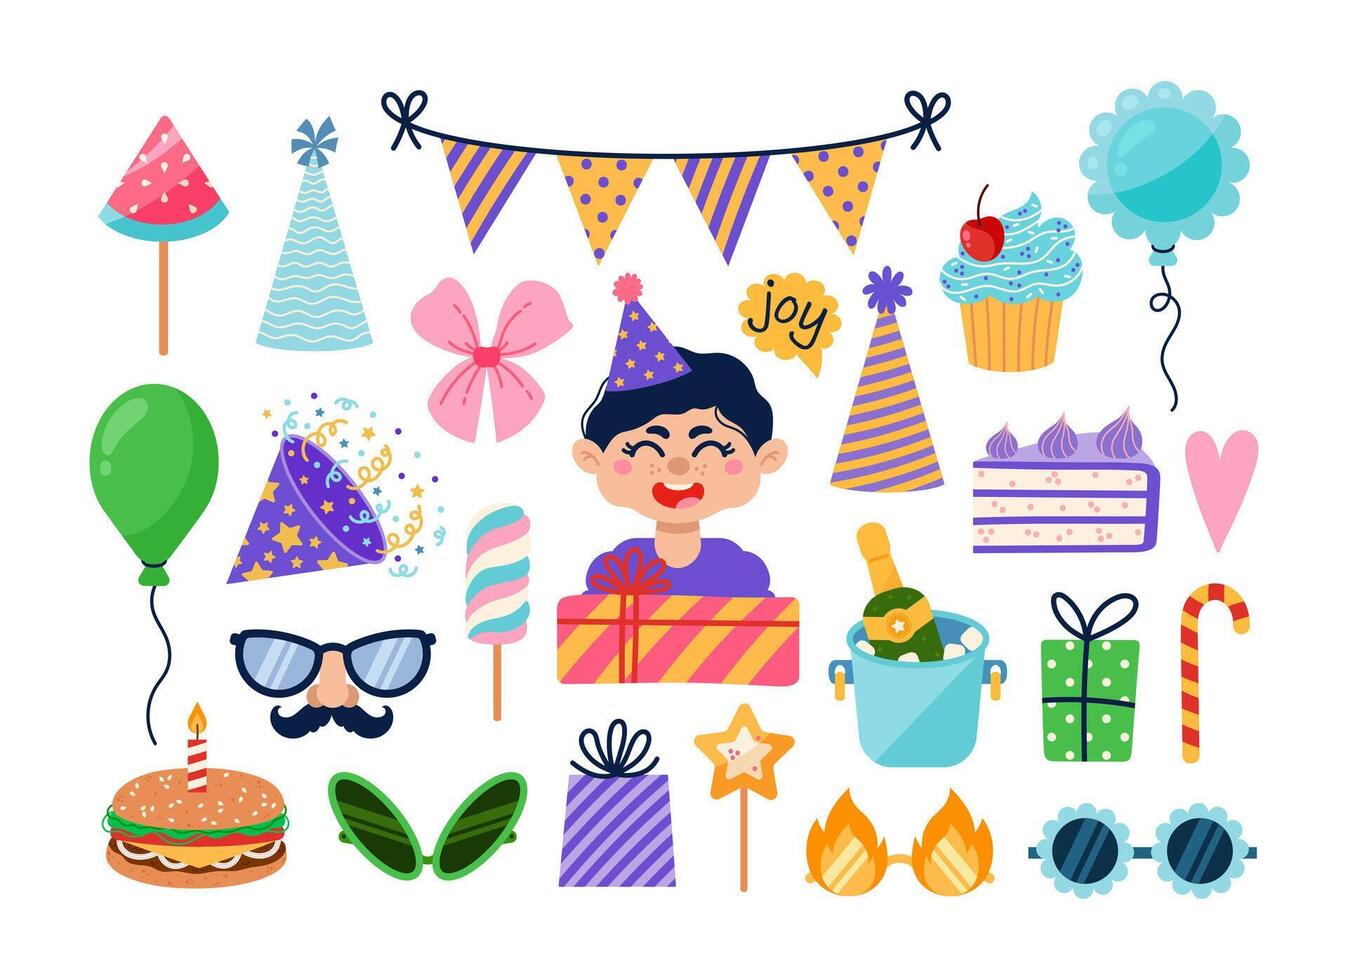 Birthday party vector set. Cute smiling boy with a gift. Festive elements - firecracker, cake, champagne, balloon, sweets, garland. Surprise for a child, holiday celebration. Happy kid cartoon clipart